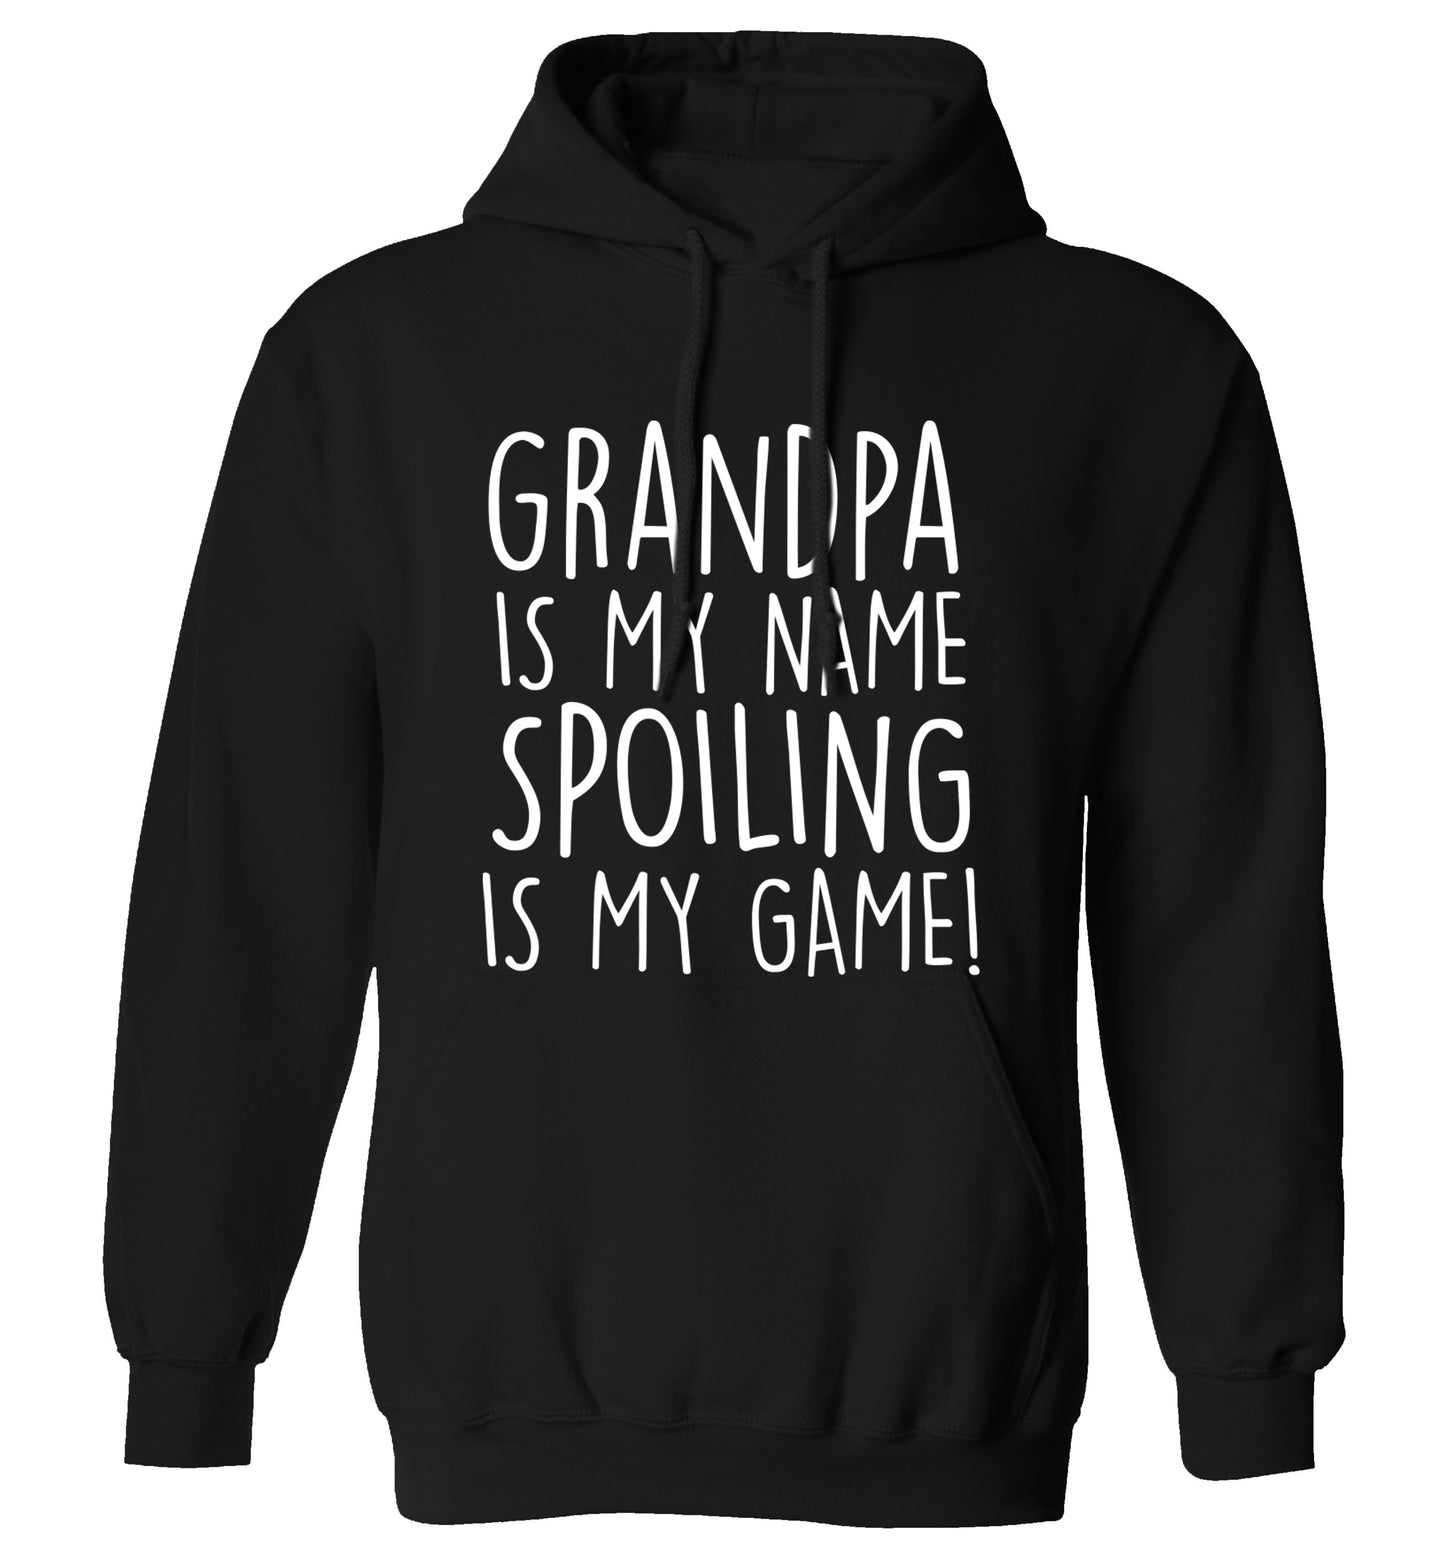 Grandpa is my name, spoiling is my game adults unisex black hoodie 2XL